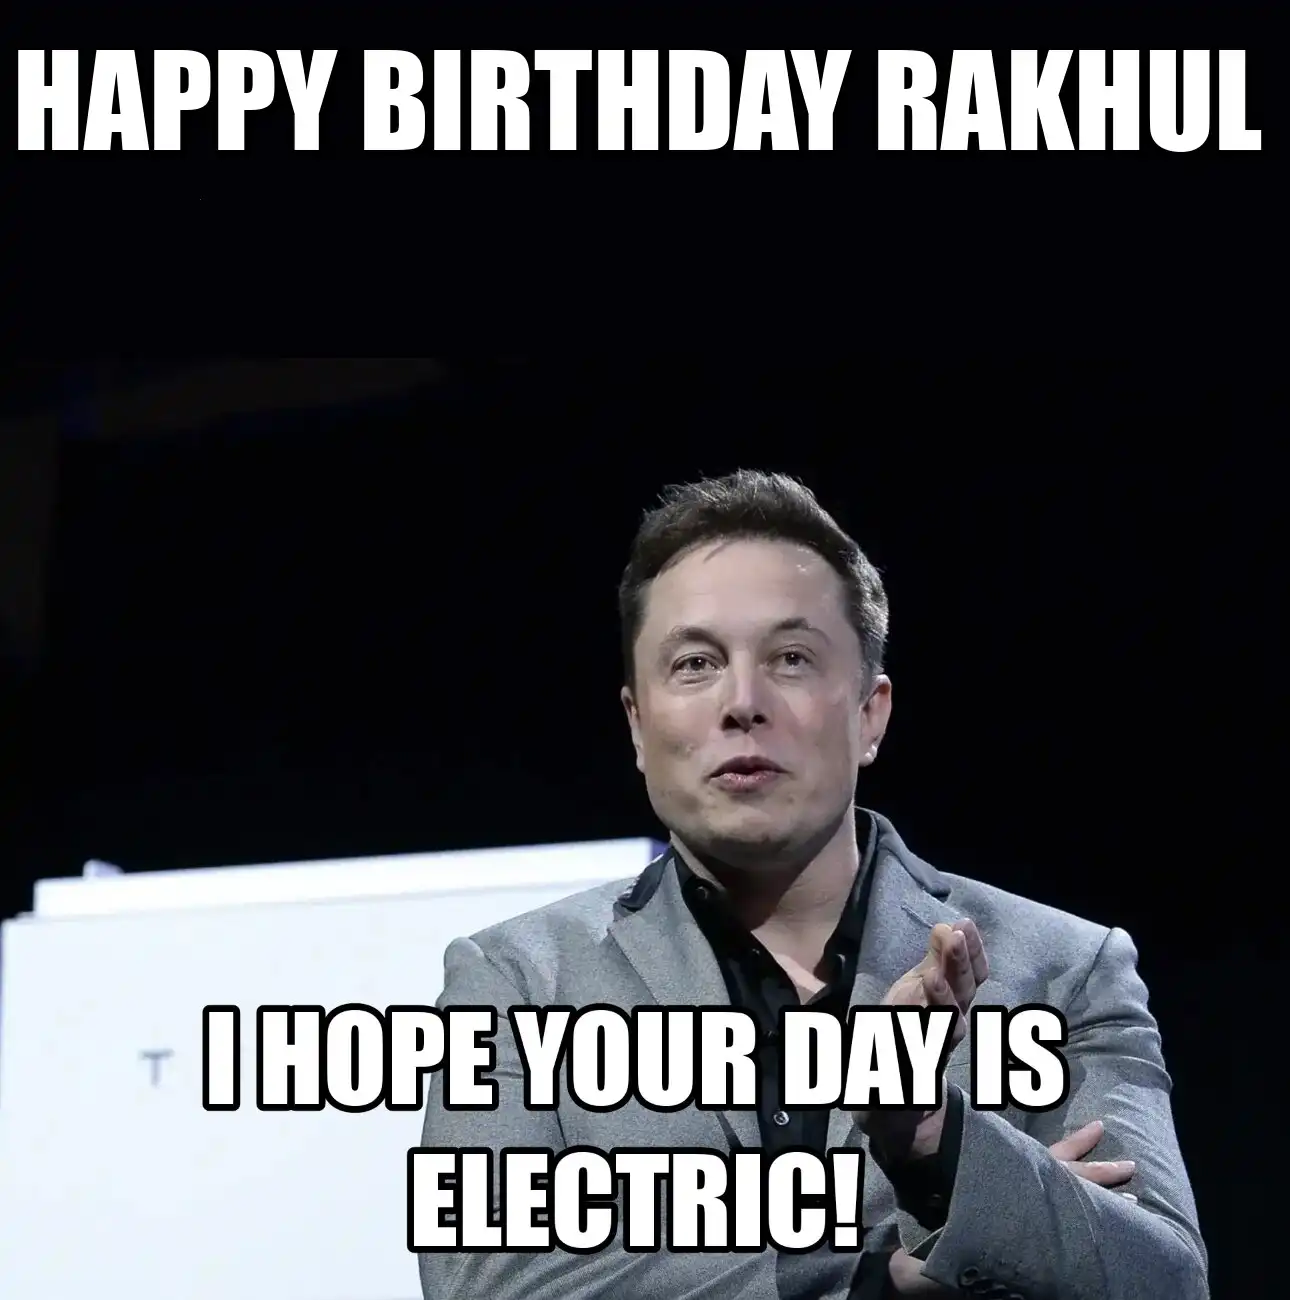 Happy Birthday Rakhul I Hope Your Day Is Electric Meme